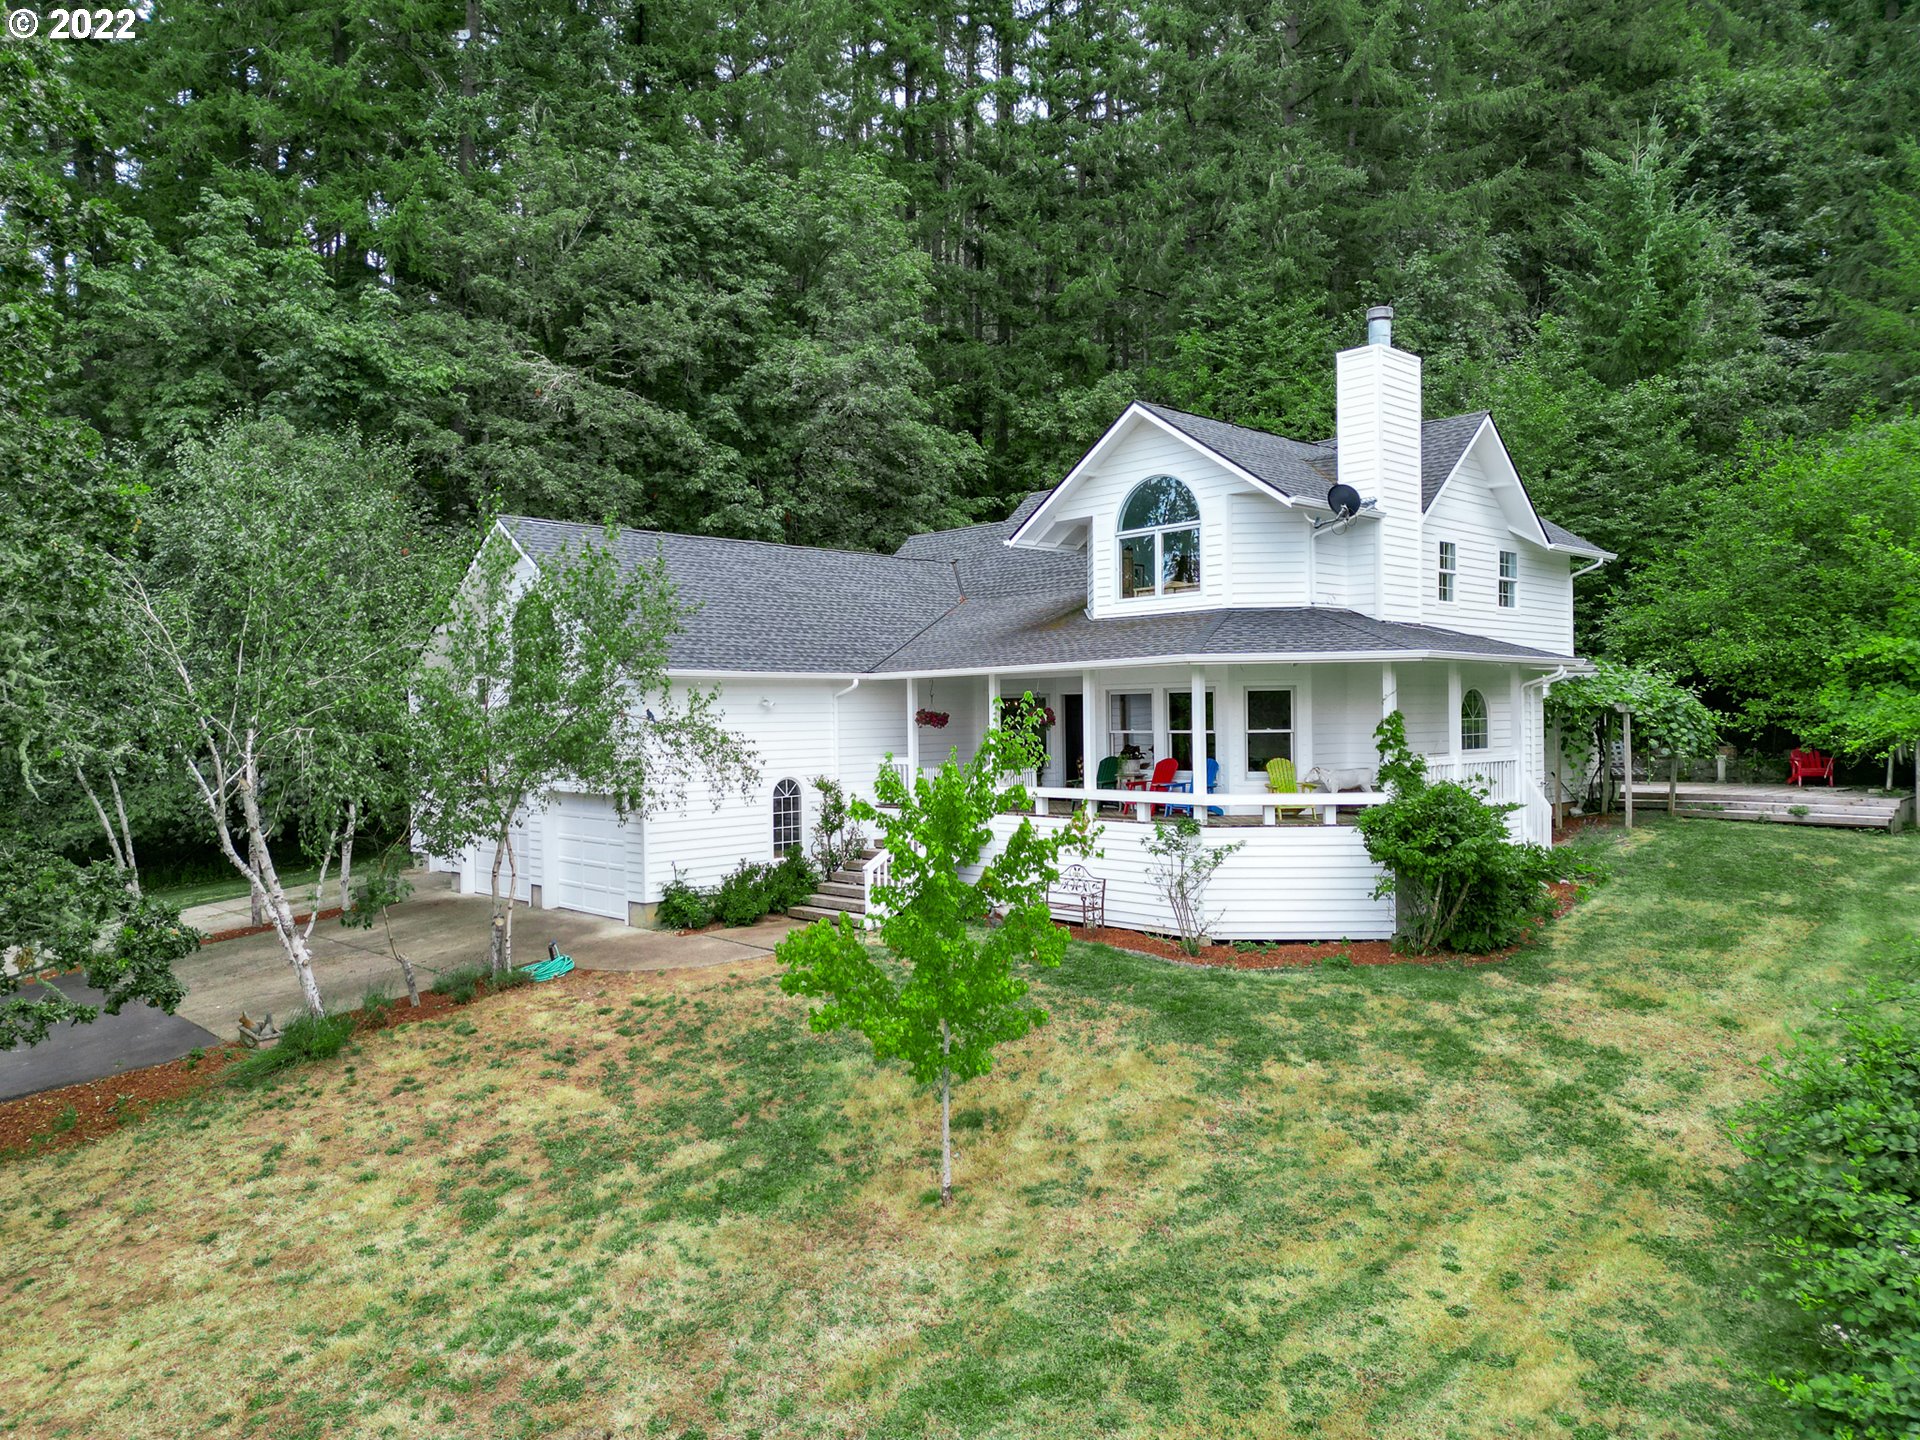 Breath taking property with fantastic privacy. Gorgeous 5 acres backs up to acres of BLM property. The main house has two owners suites on the first floor with a nice open floor plan. New wood stove 2019, new roof 2019, new heat pump 2018, new submersible pump in well 2020 and new electrical lines and pipes from well to pump house. Guest house  850 sqft with bedroom, two full bathroom, one car garage and bonus hobby room. Great for multi generation living it provides a nice separation of space.